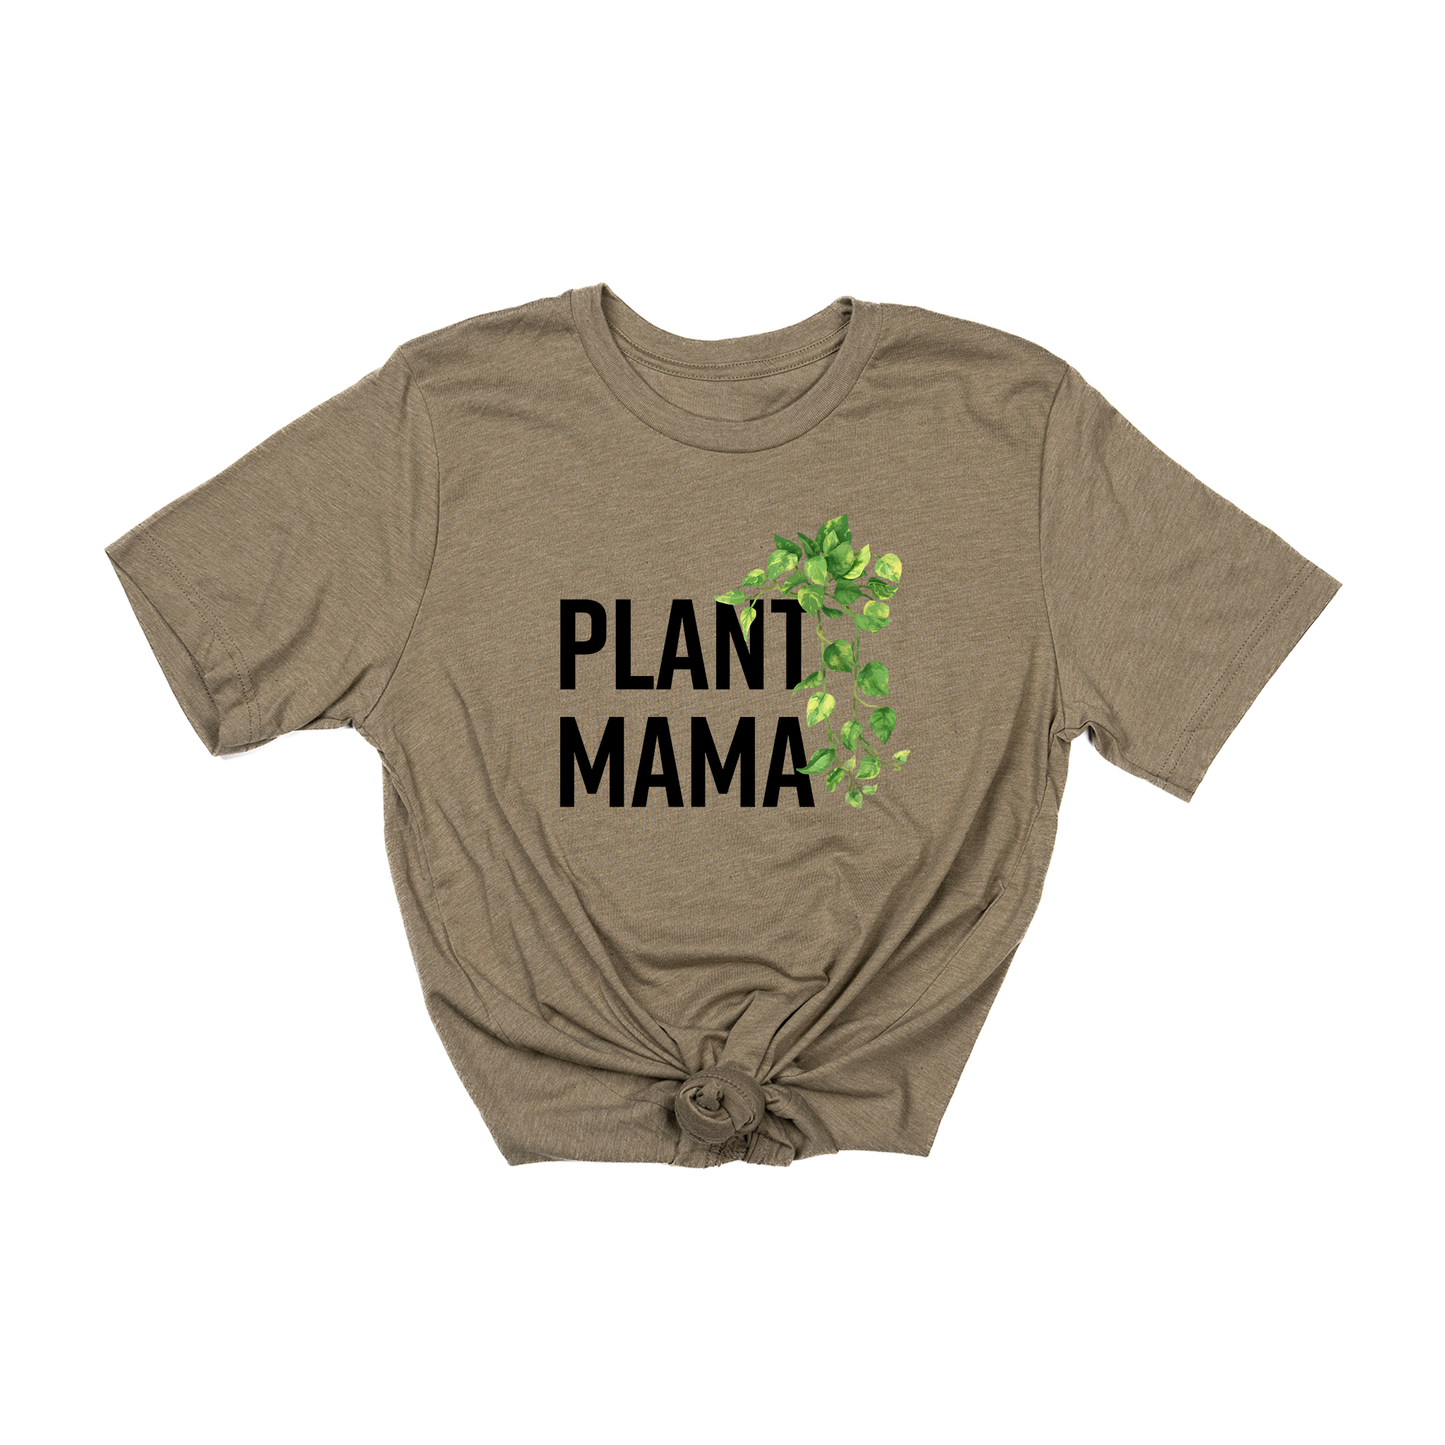 Plant Mama (Across Front) - Tee (Olive)